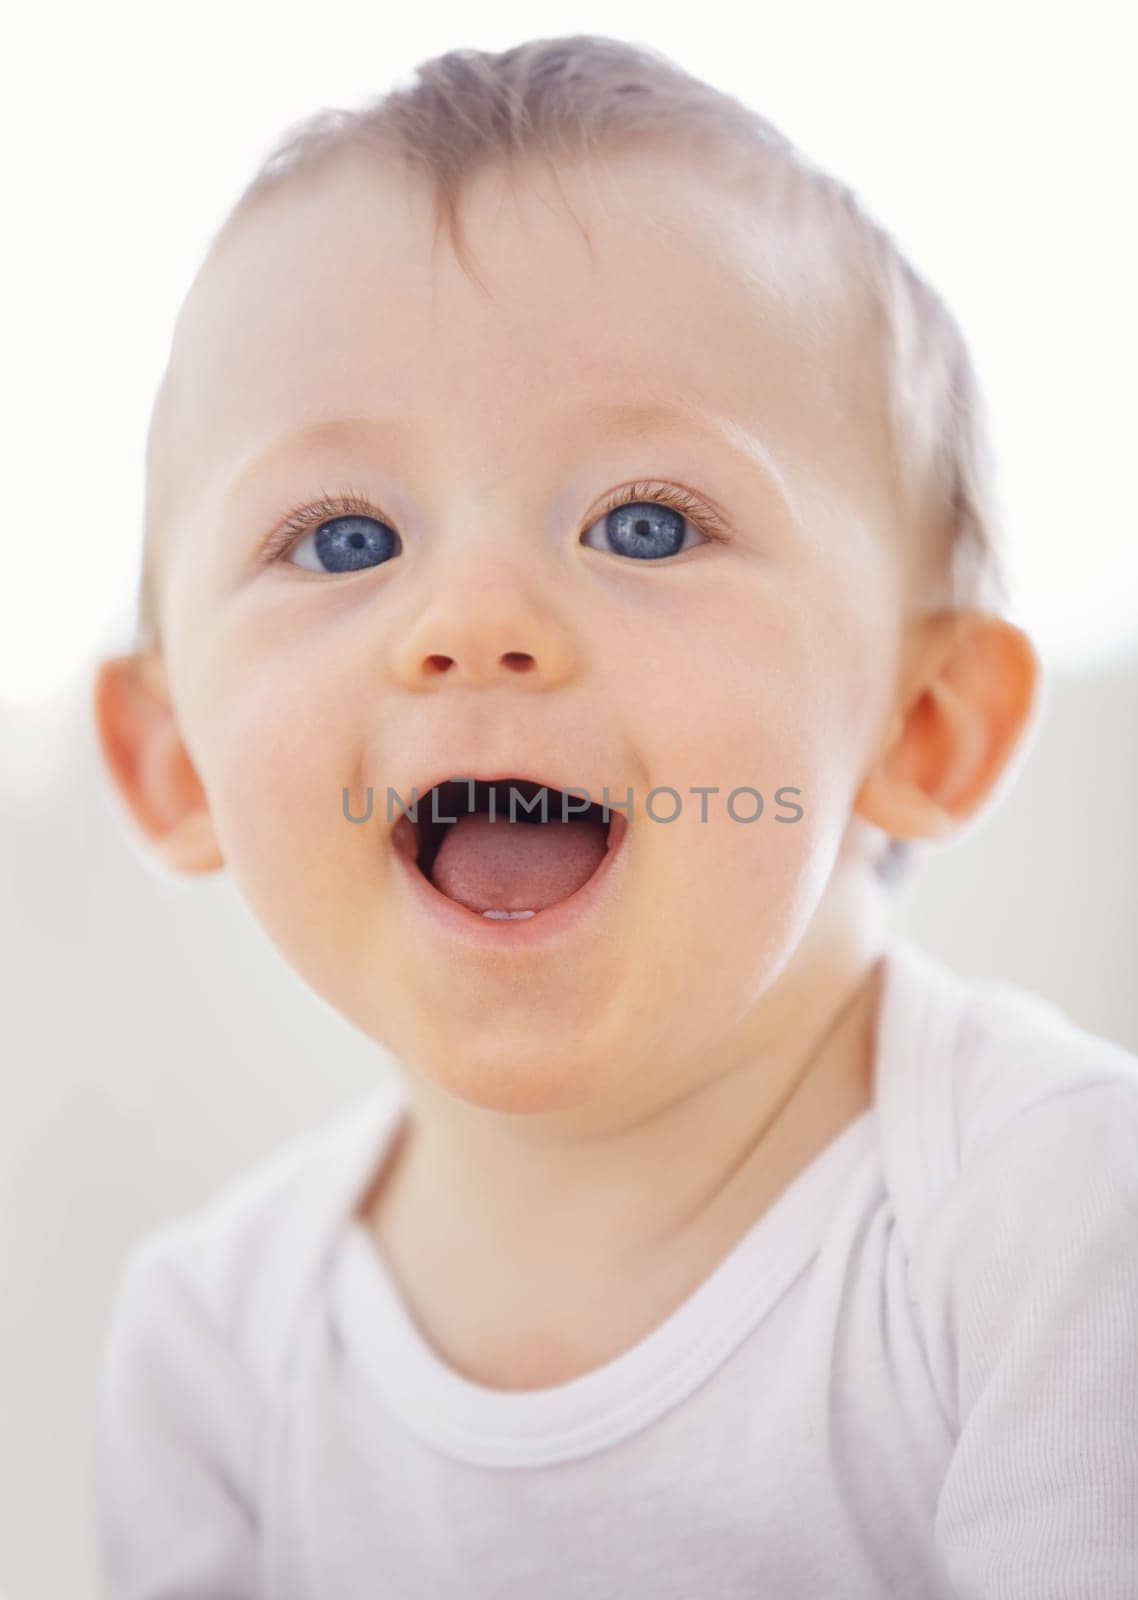 Home, happy and face of baby relax, resting and calm in nursery for sleeping or wake up in morning. Family, youth and closeup of infant newborn in bedroom for child development, growth and wellness.